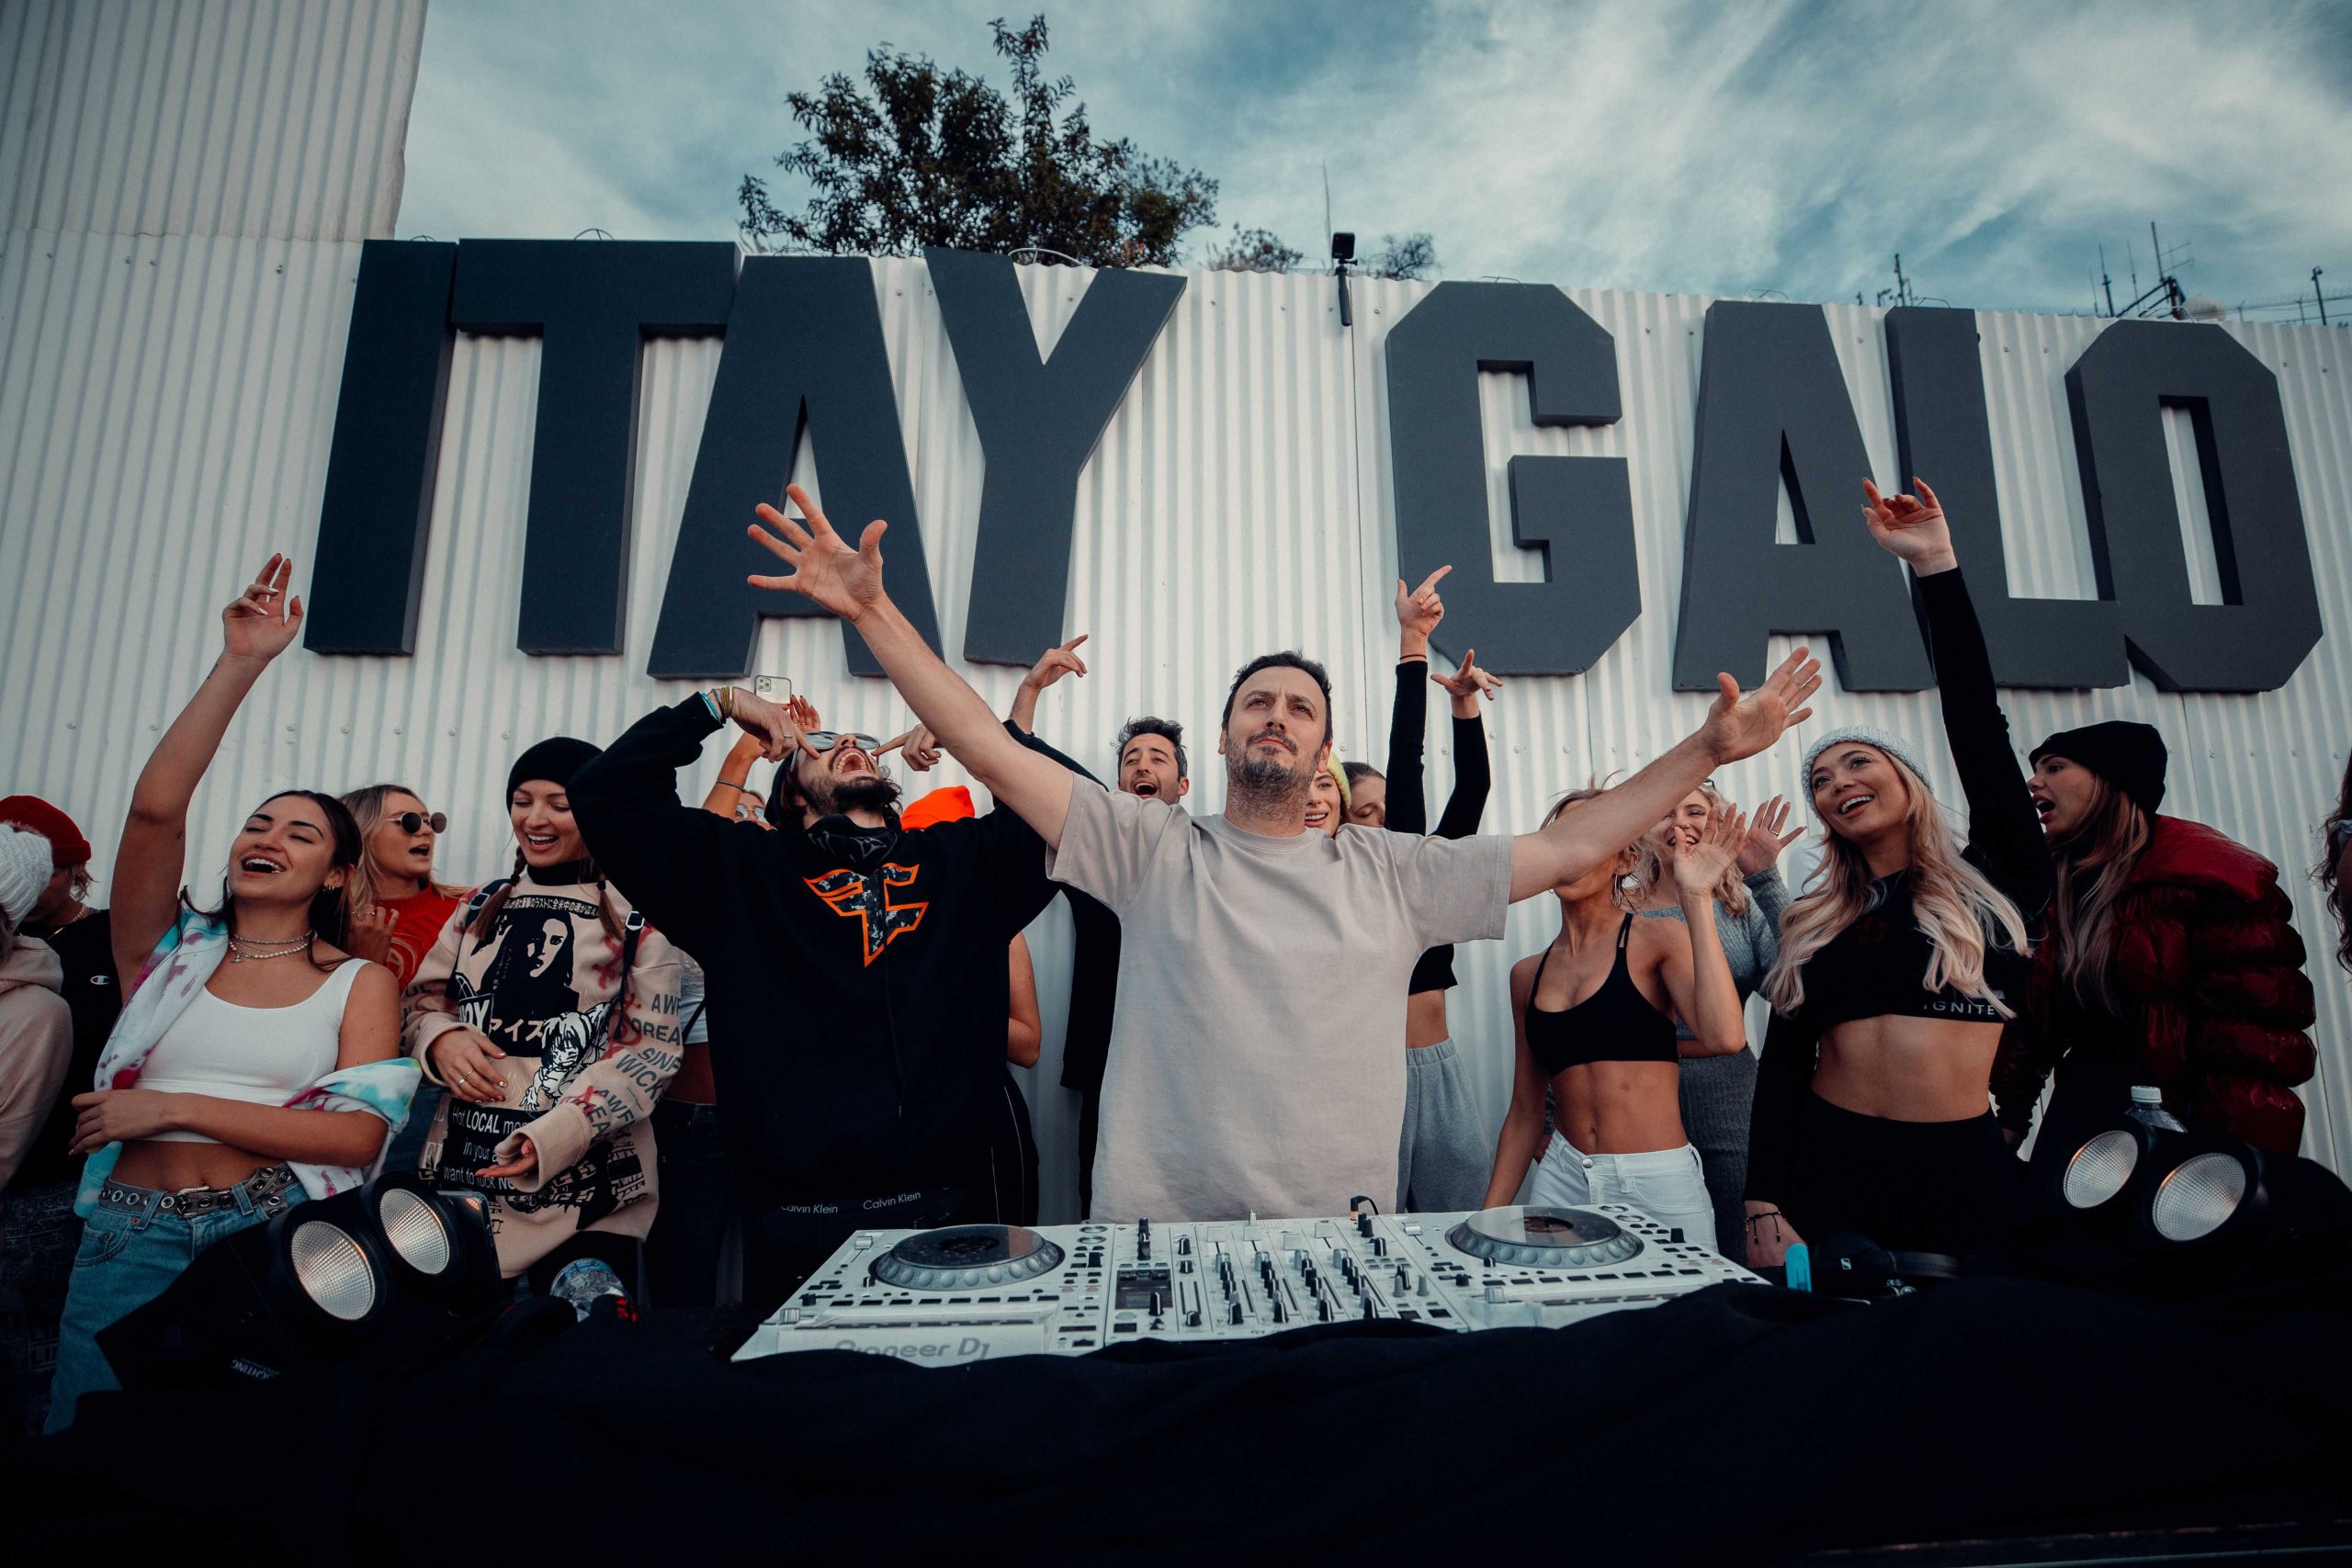 Renowned DJ Itay Galo delivers monumental DJ set from the Hollywood sign